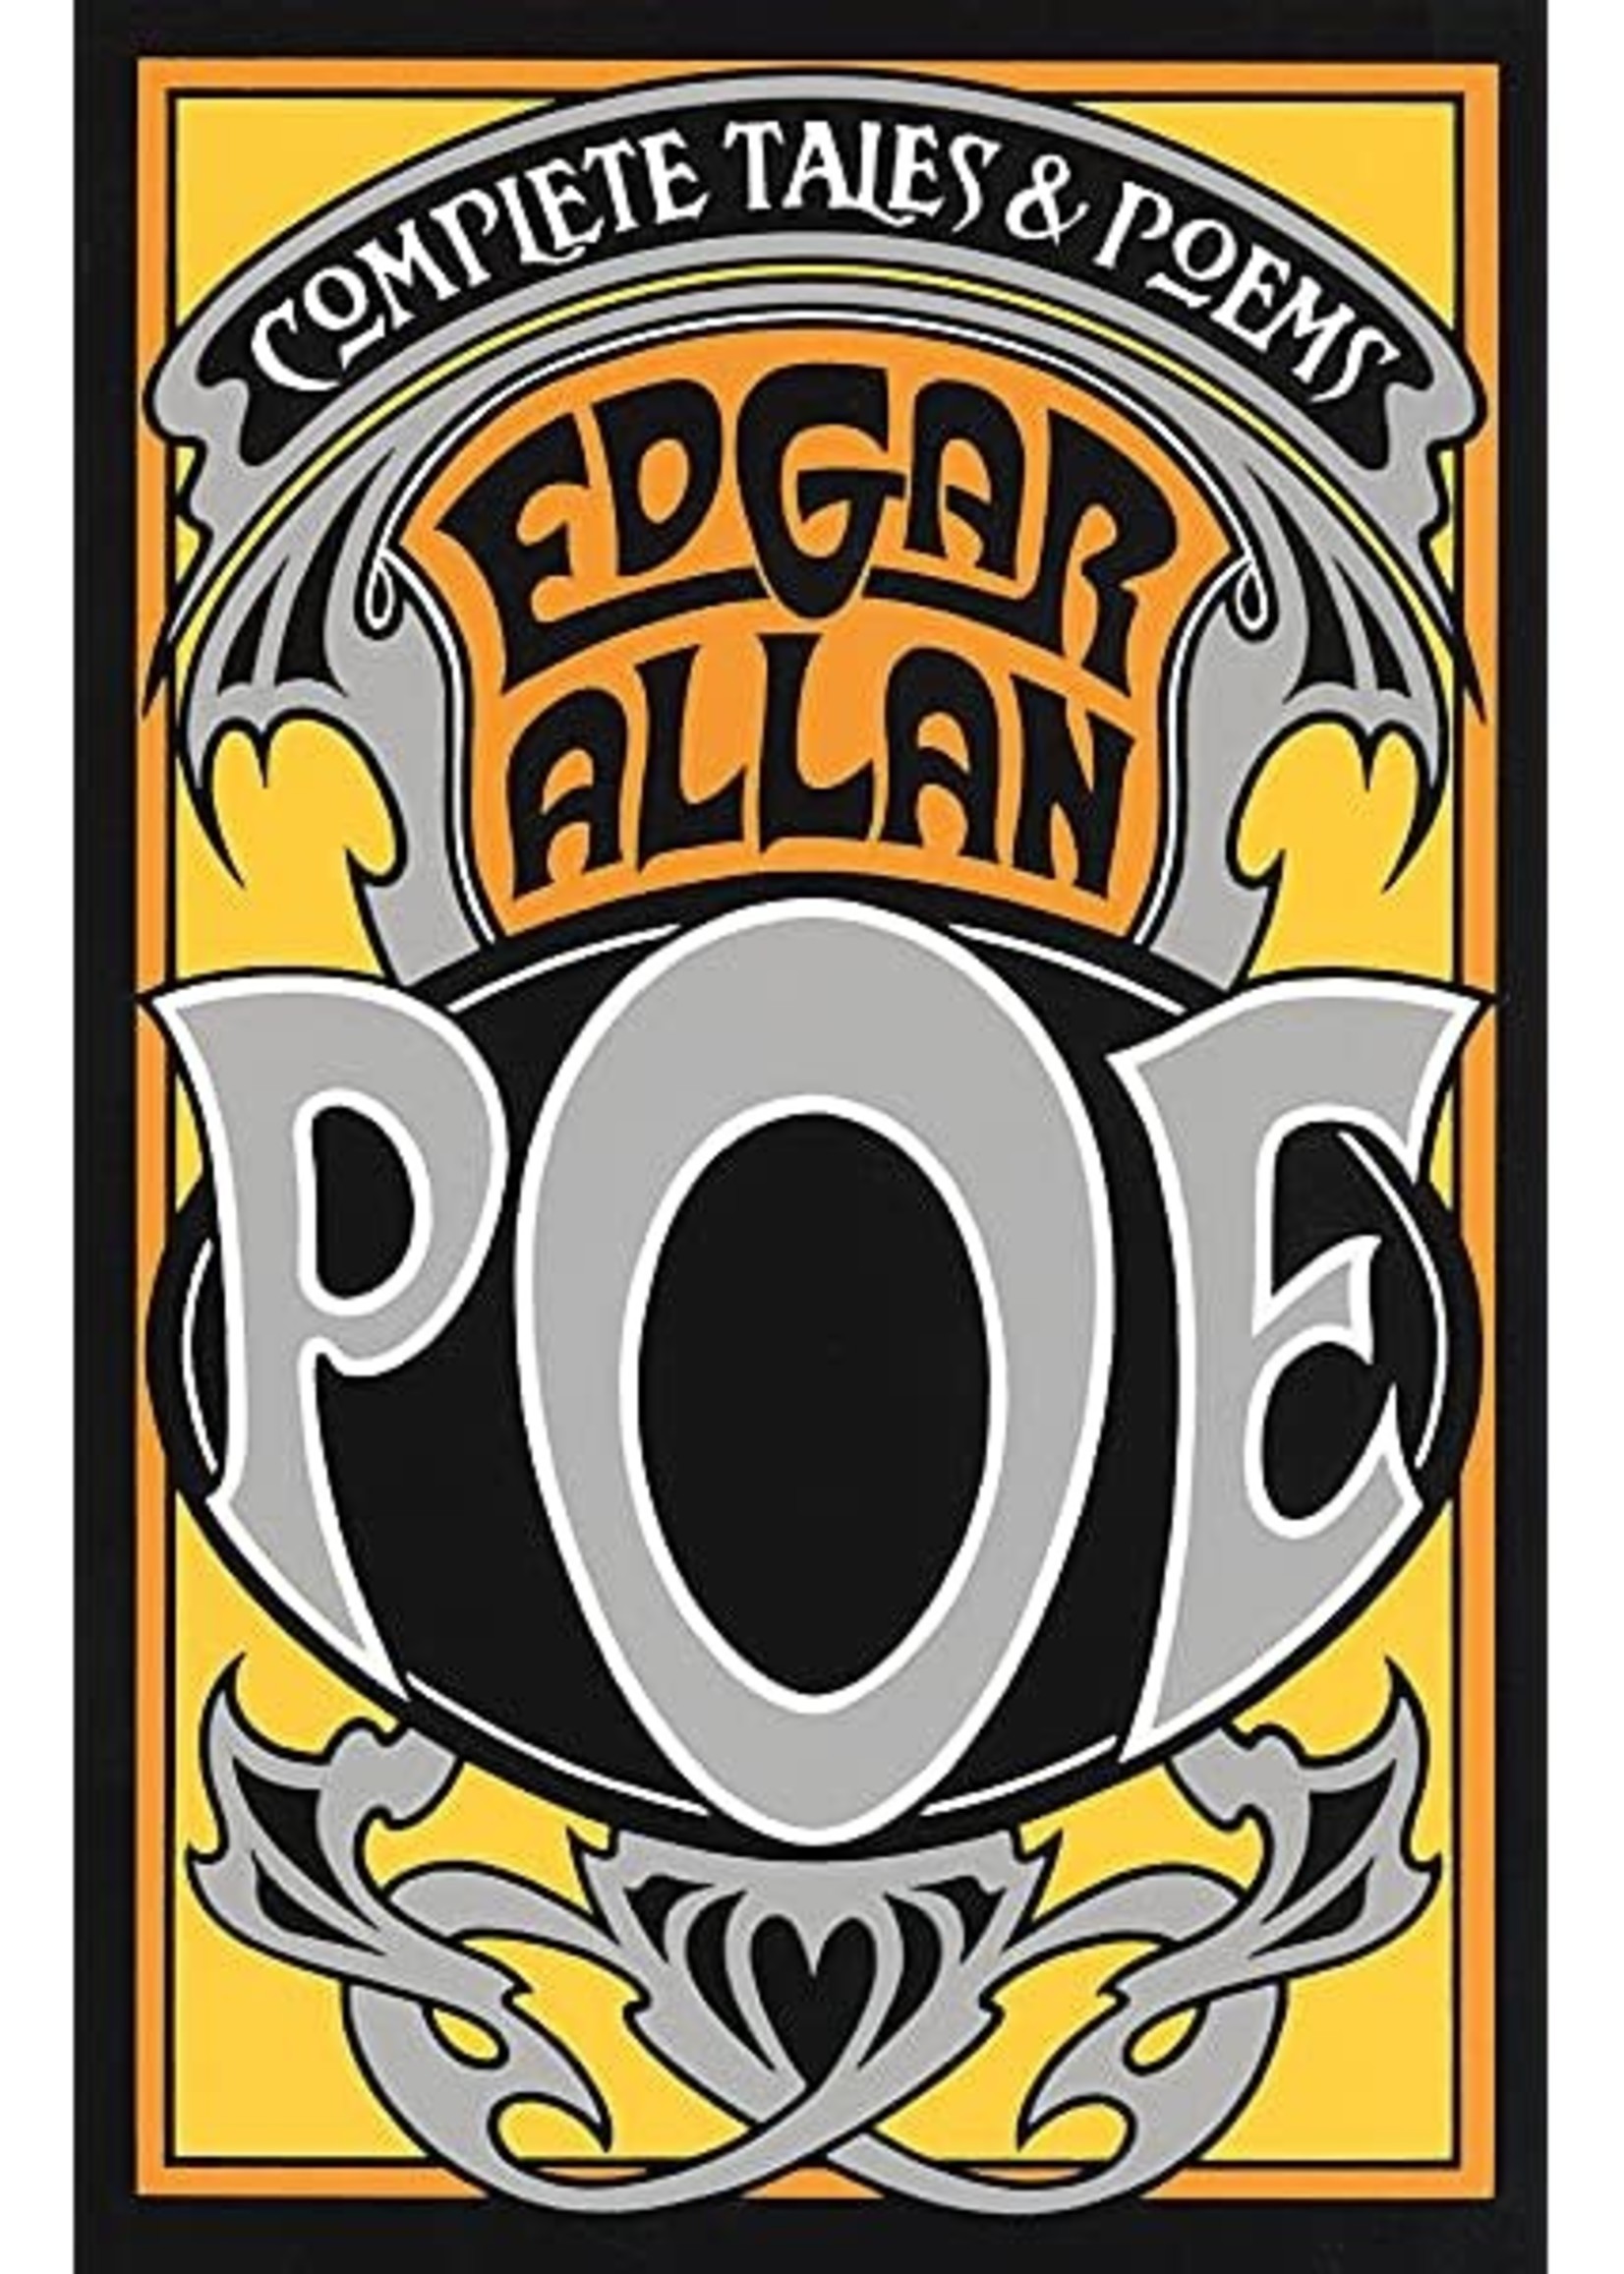 Complete Tales and Poems by Edgar Allan Poe